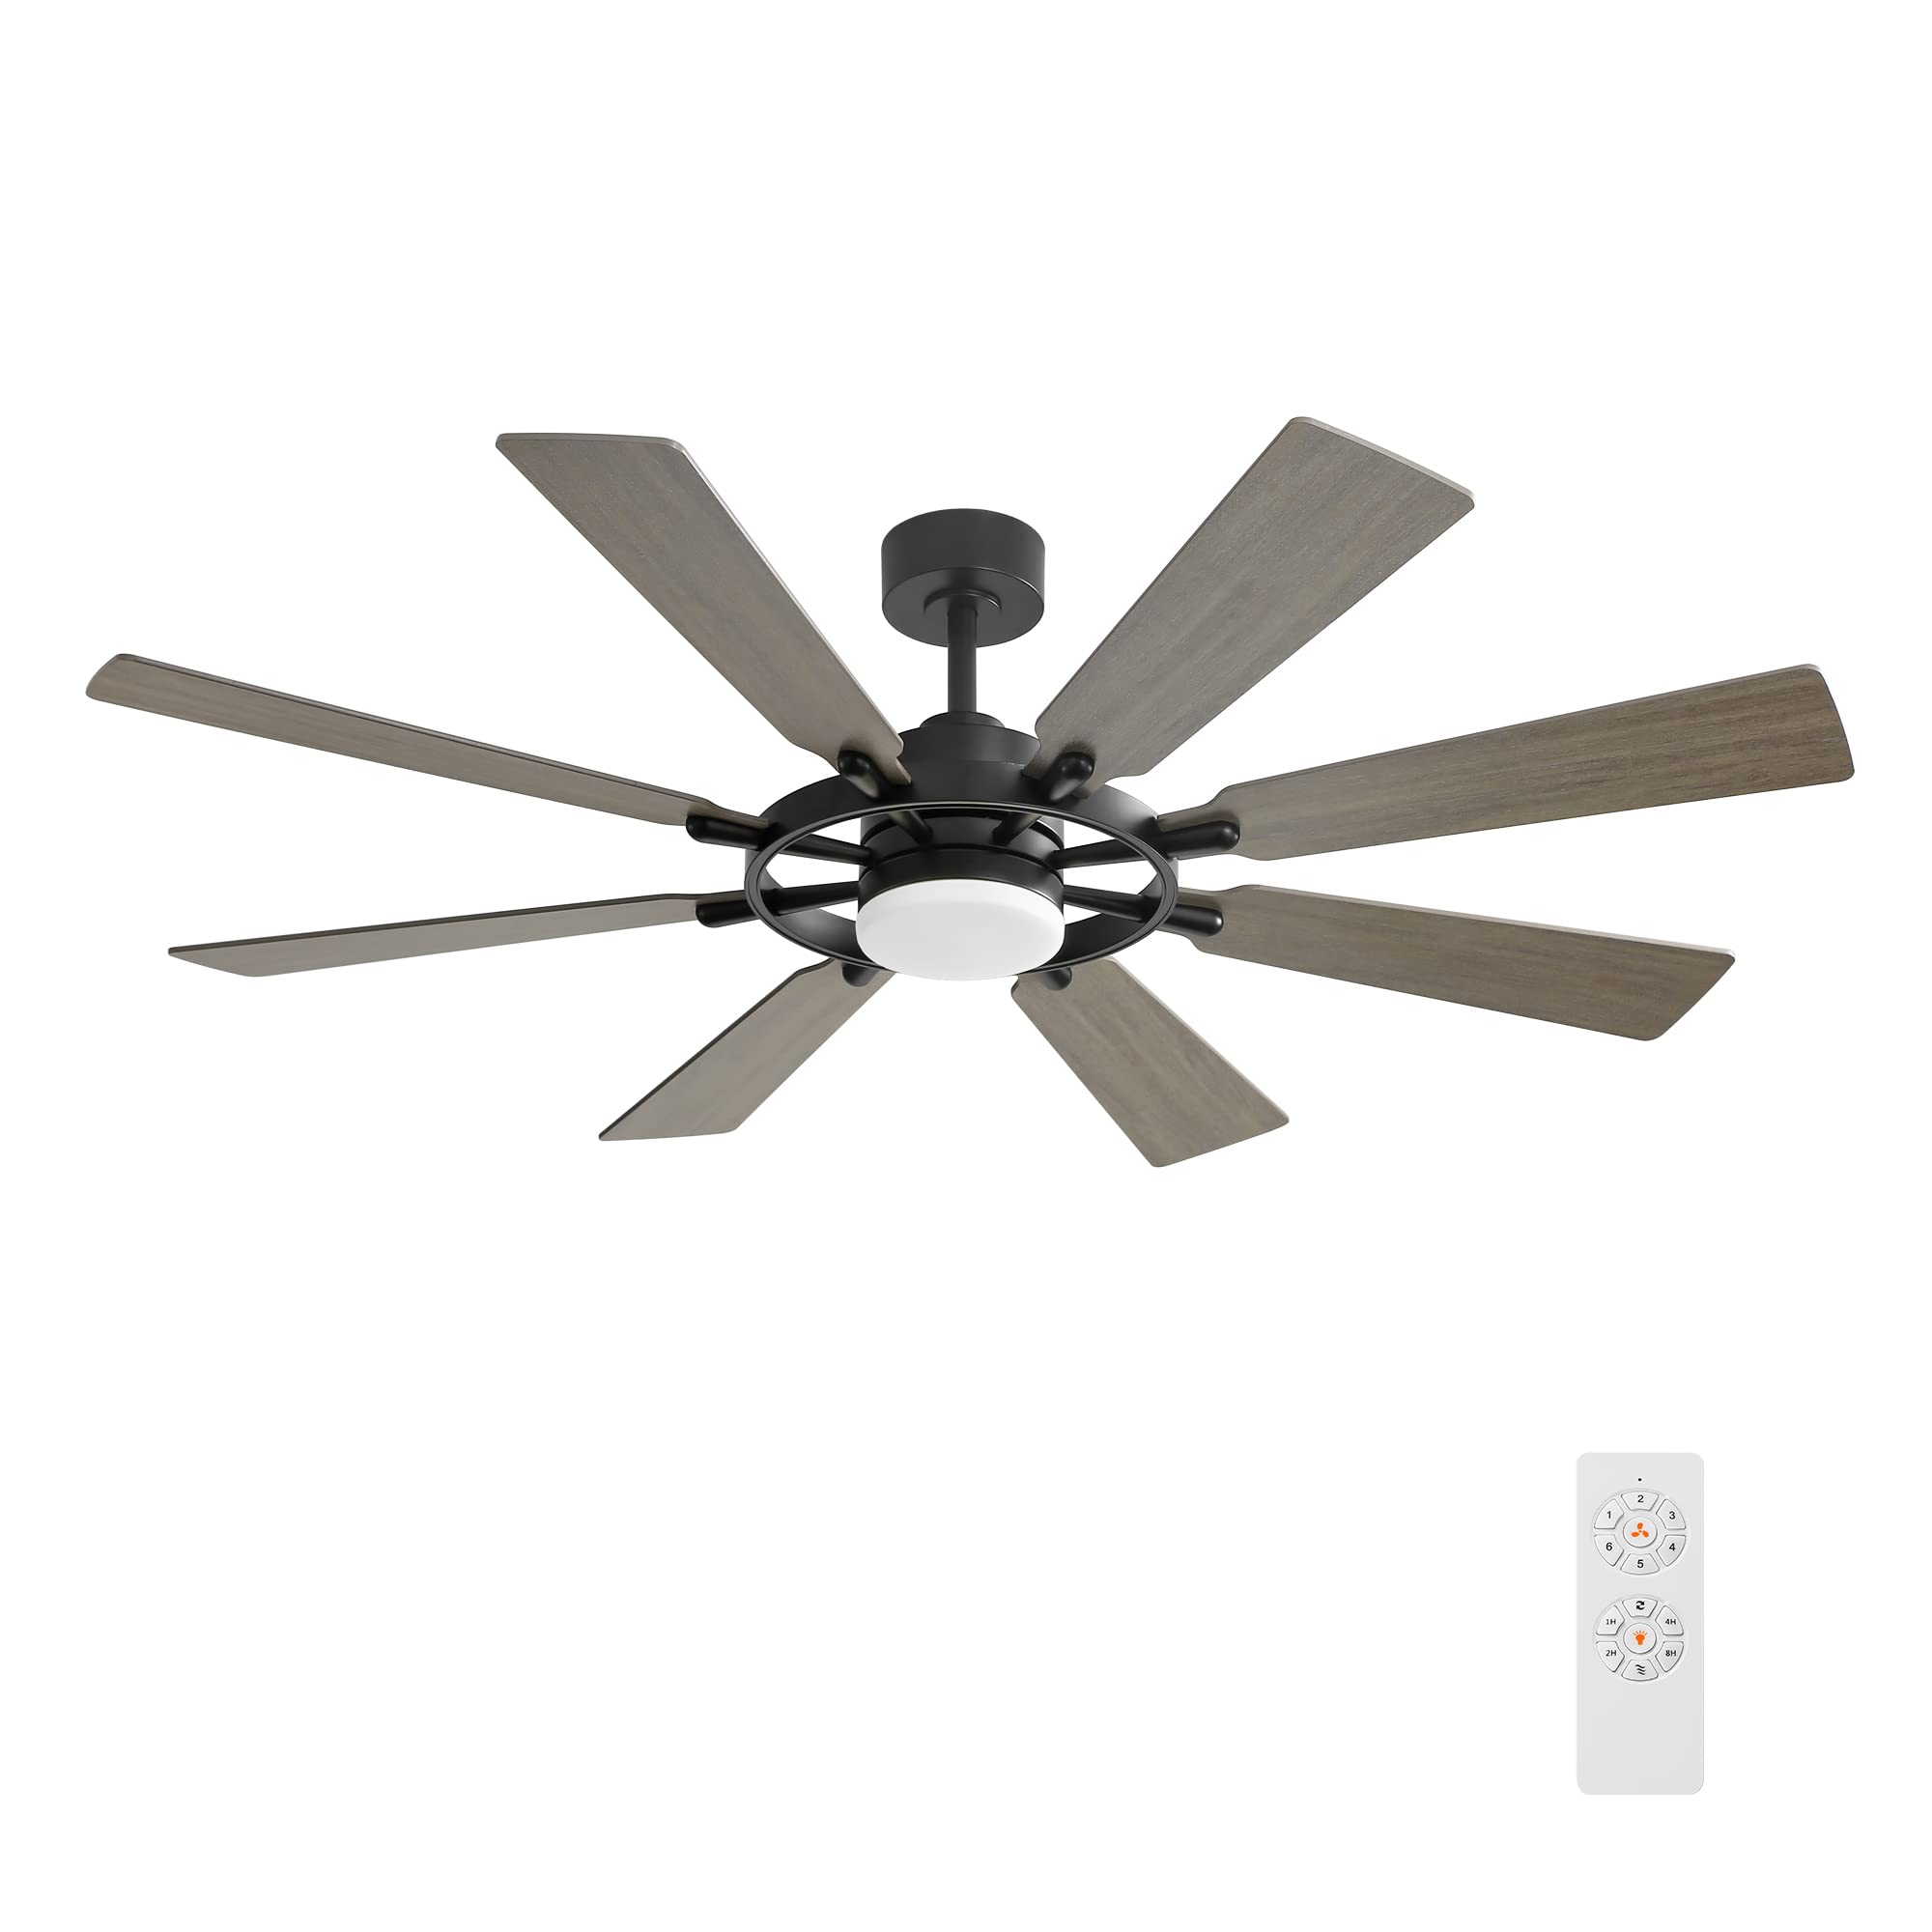 ELEHINSER 80" Ceiling Fan with Lights and Remote Control